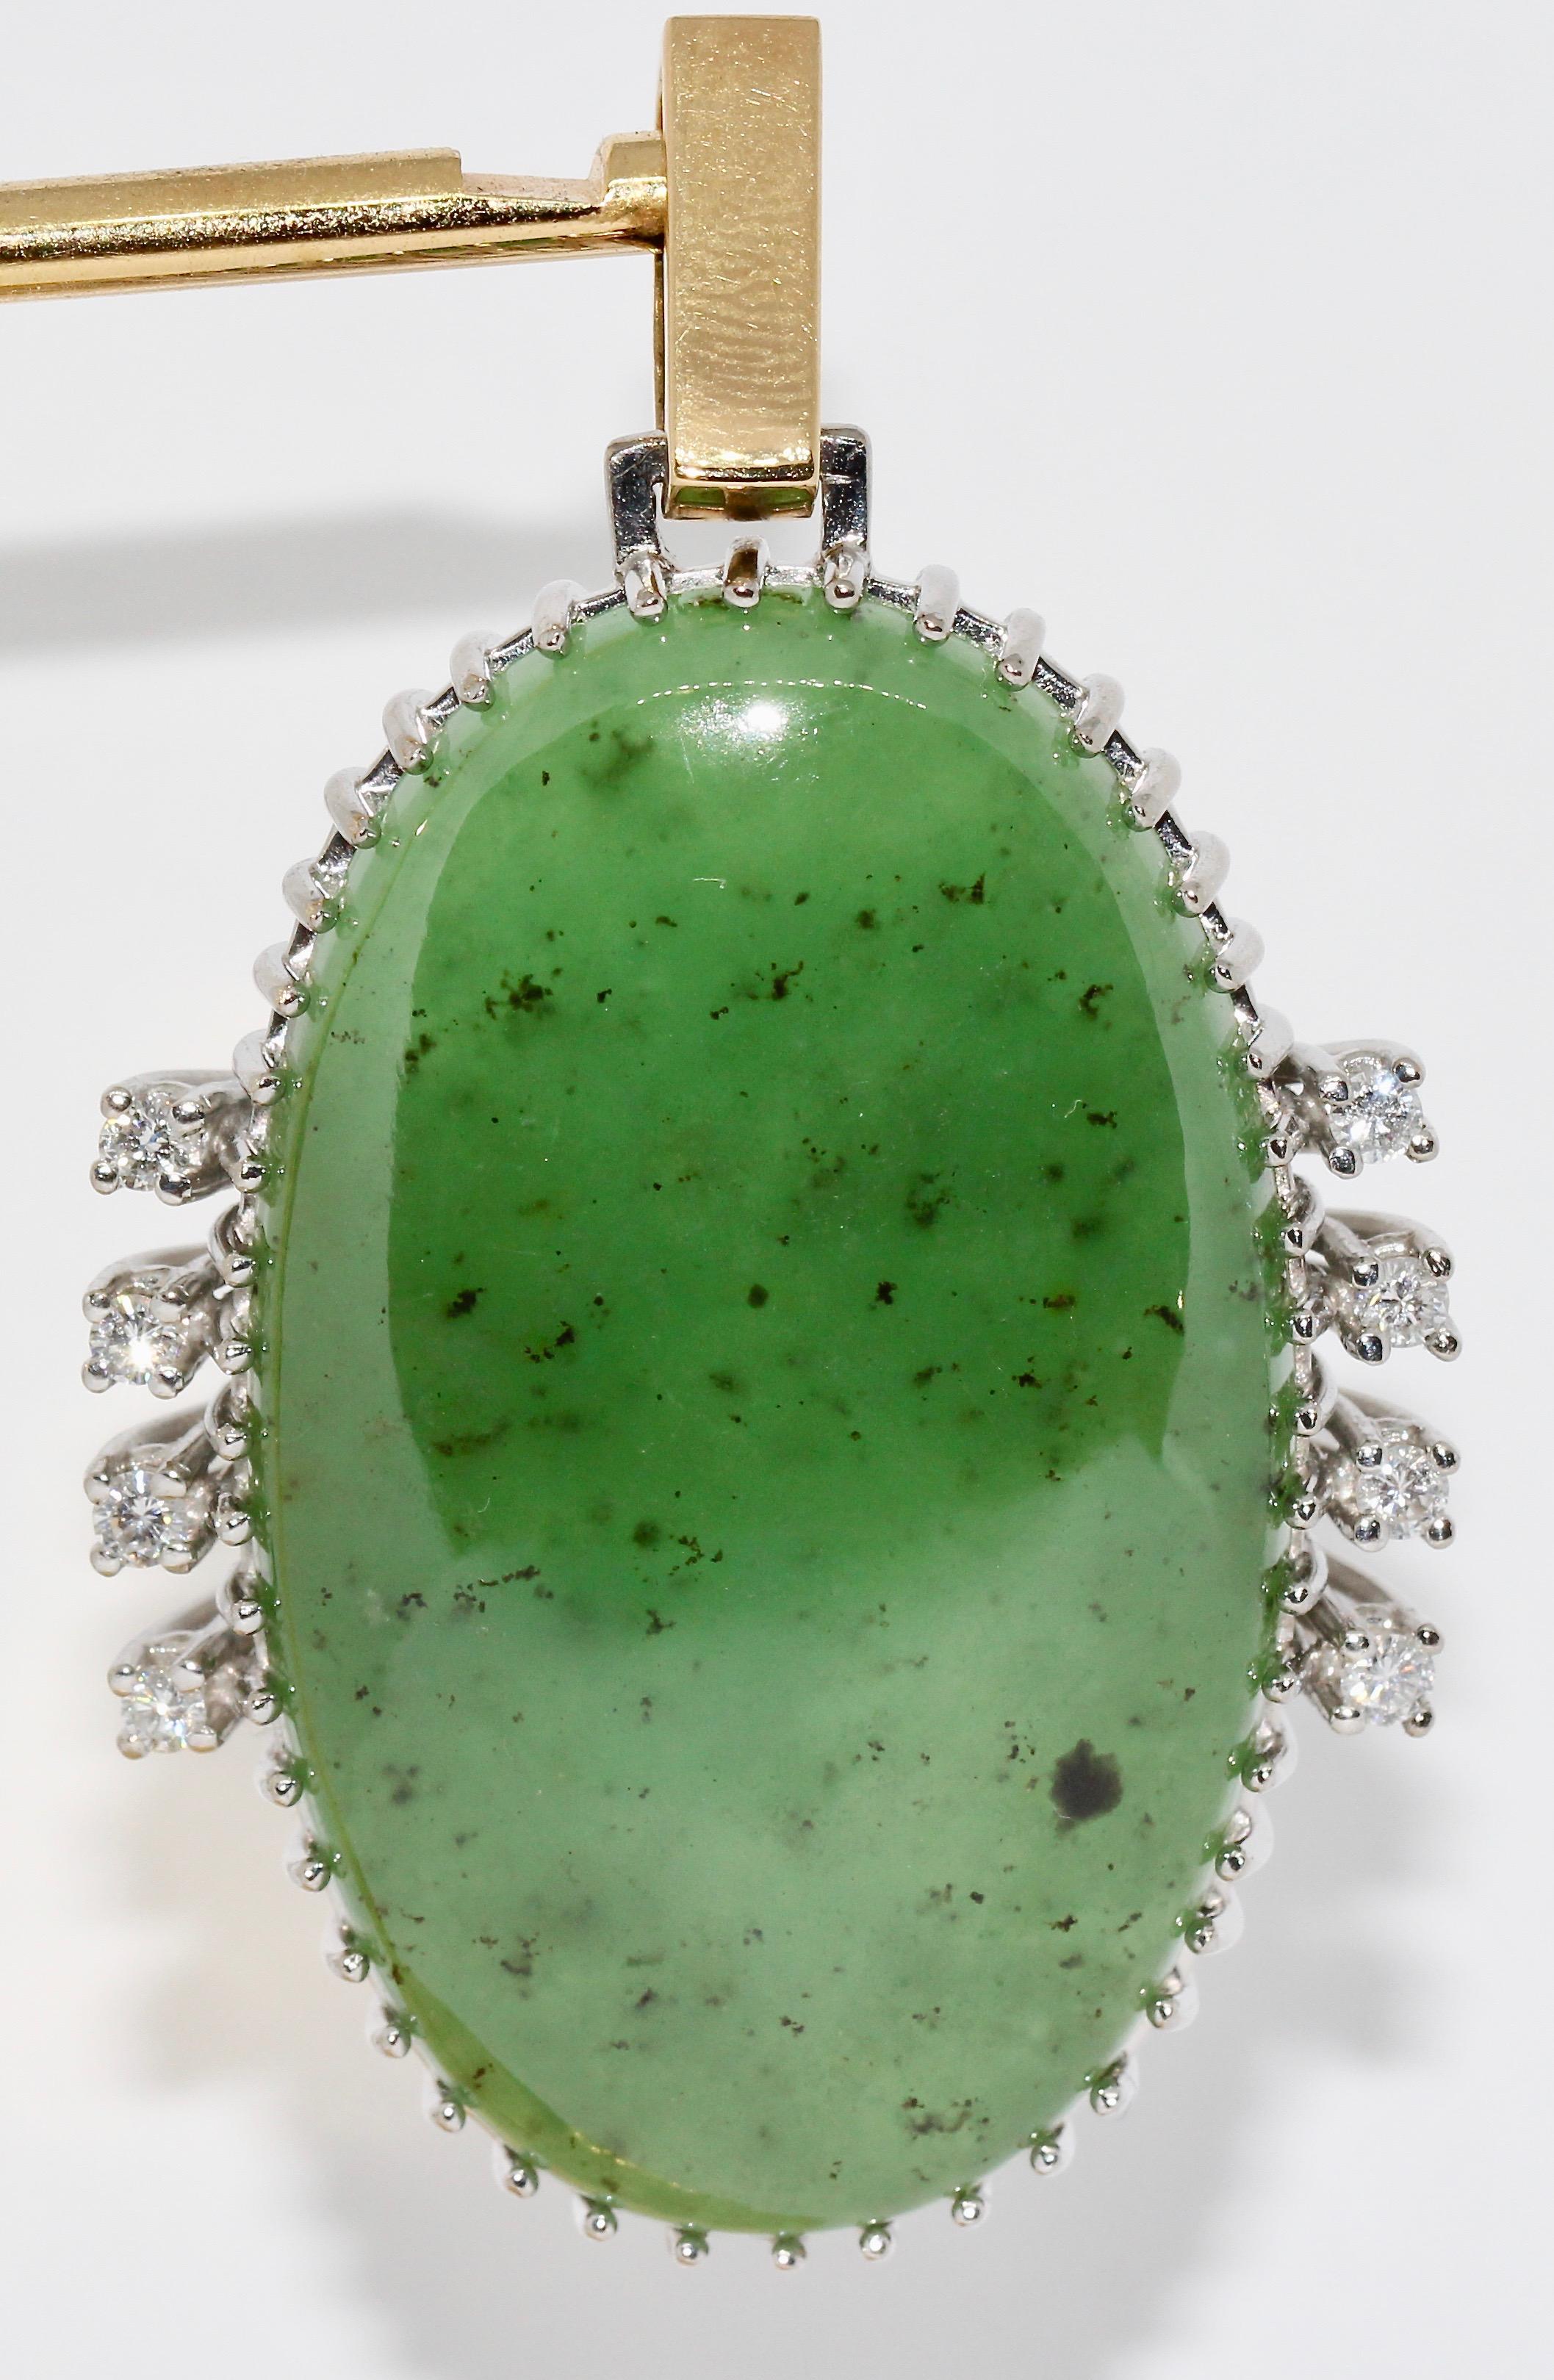 Big Jade Pendant, Enhancer, 18 Karat Gold with diamonds.

The eight diamonds have a very good clarity and white color.
Measured without the two eyelets.

You will find the matching necklace, ring and bracelet in our other offers.